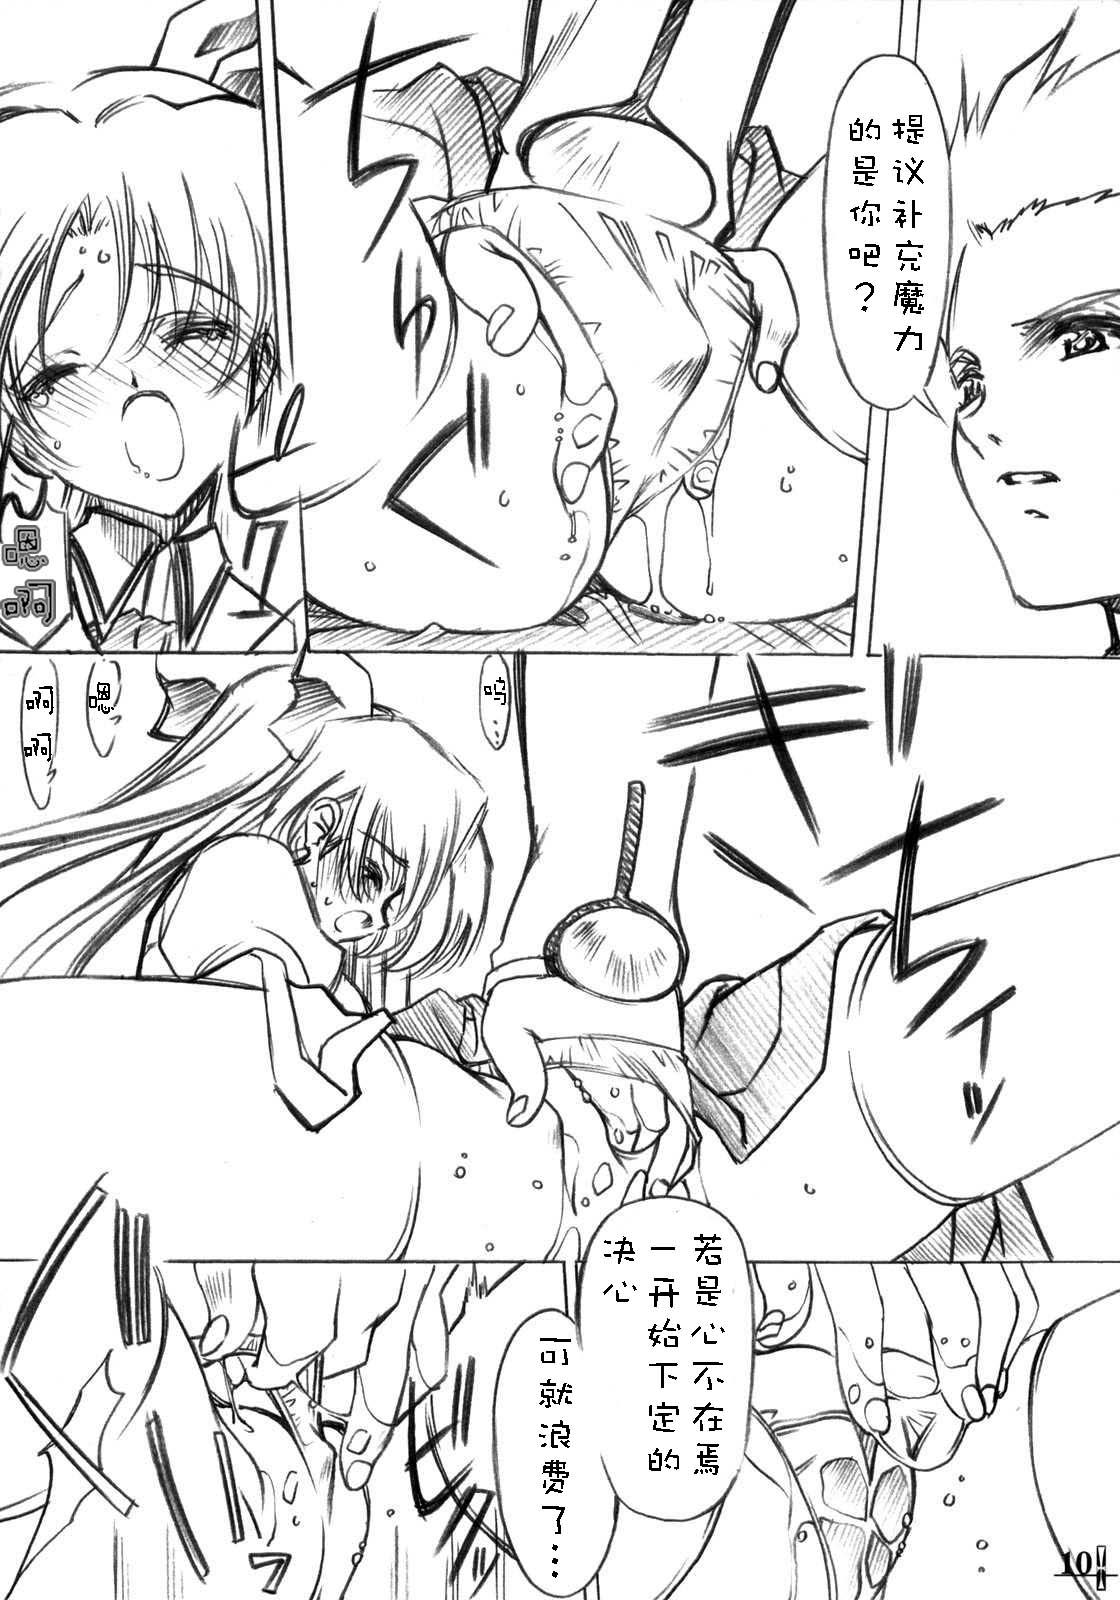 Jerk Off Seven Cardinal Sins みりおんばんく - Fate stay night Roughsex - Page 9